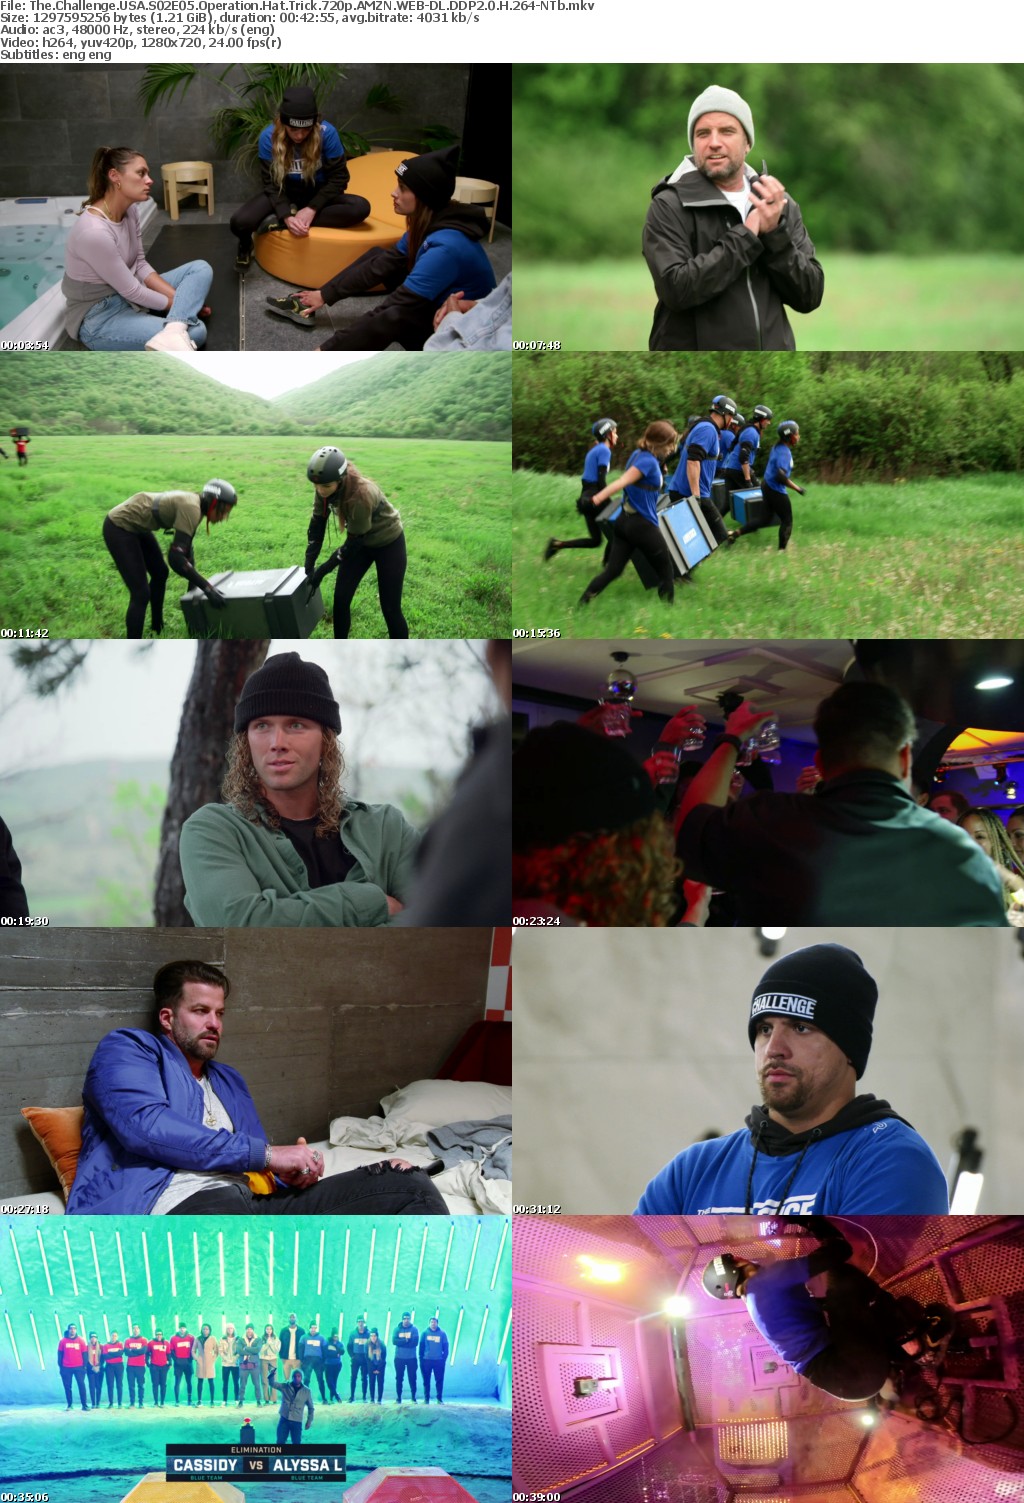 The Challenge USA S02E05 Operation Hat Trick 720p AMZN WEB-DL DDP2 0 H 264-NTb